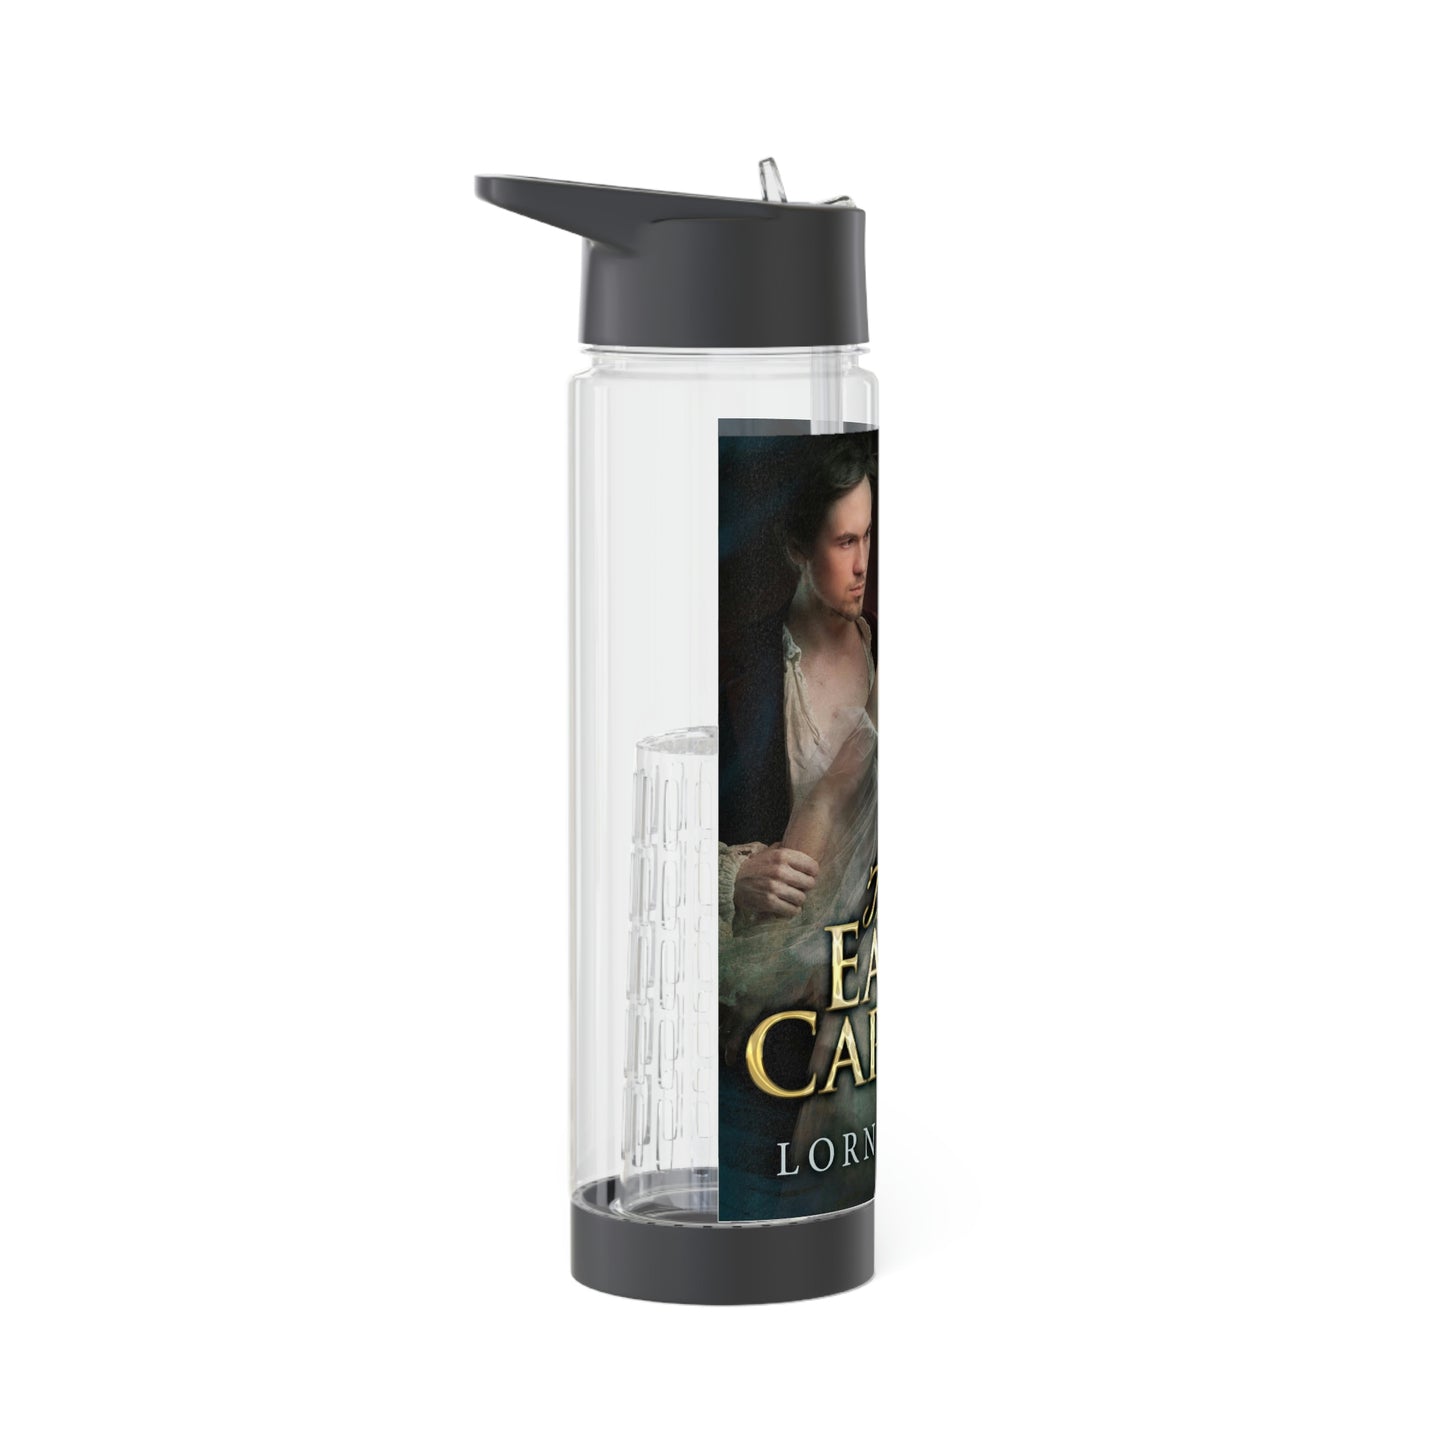 The Earl's Captive - Infuser Water Bottle